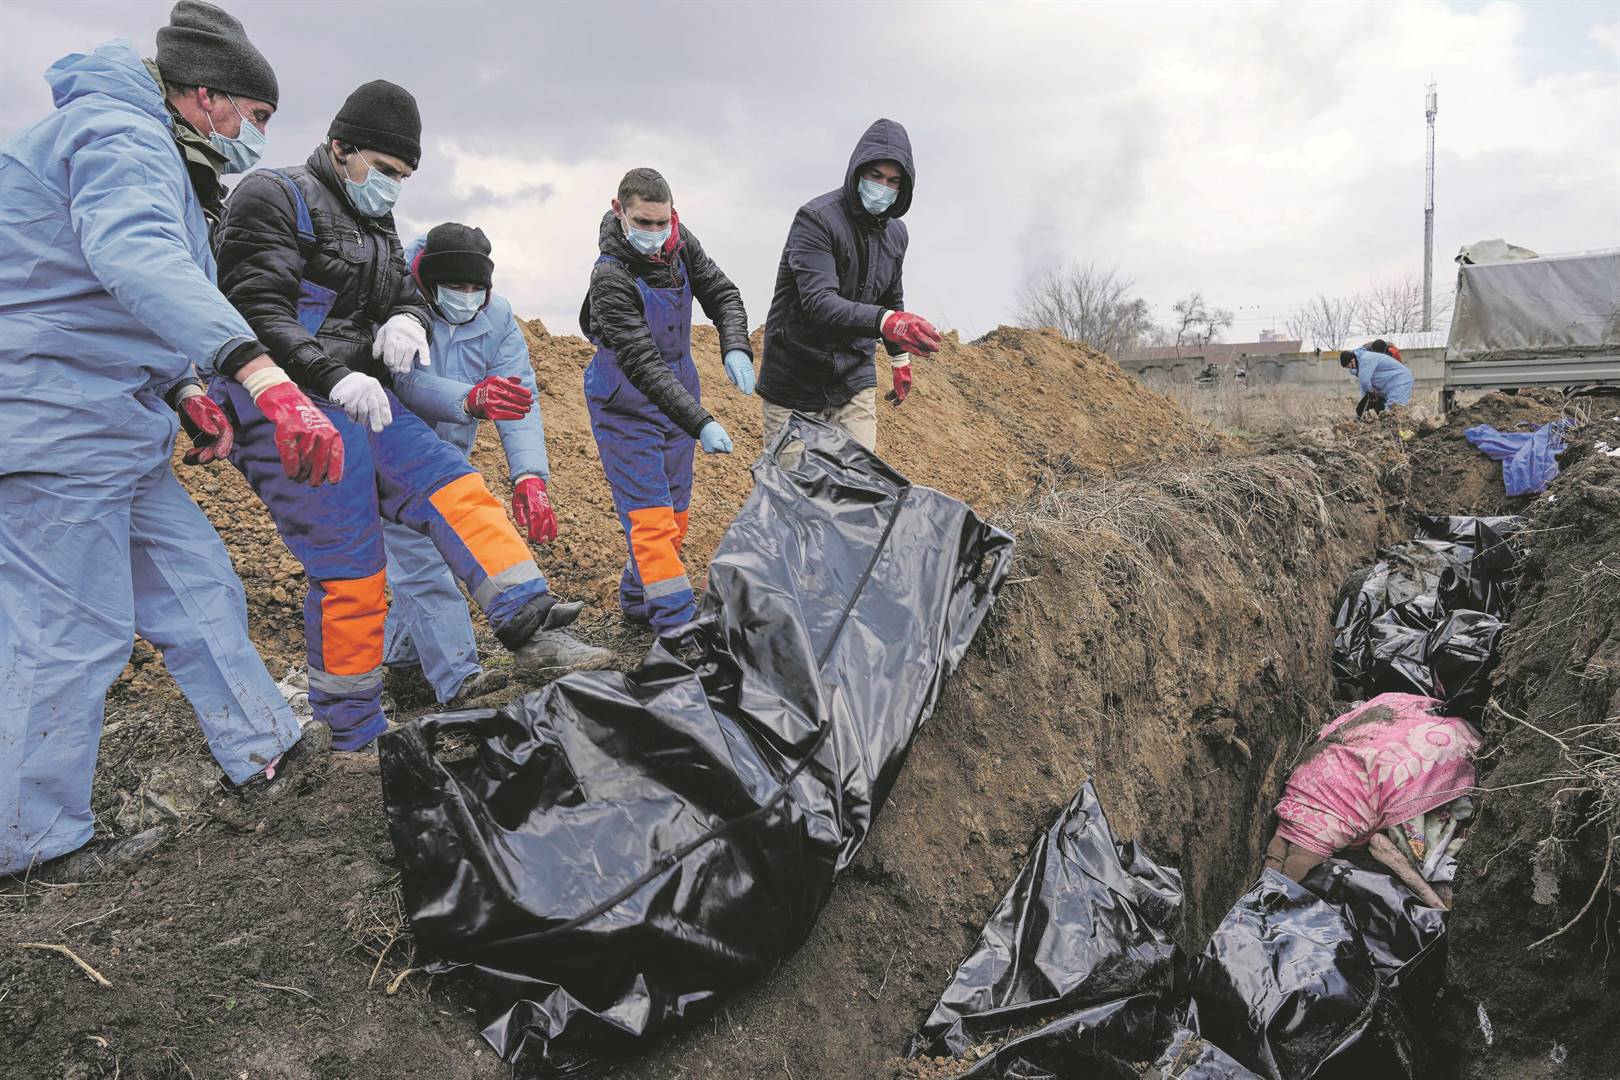 Dead bodies are placed into a mass grave on the outskirts of Mariupol, Ukraine. The war is claiming bodies on both sides . As in the words of Kwame Nkrumah, “When the bull and elephant fight, the grass is trampled down.” Photo: Evgeniy Maloletka / ap photo